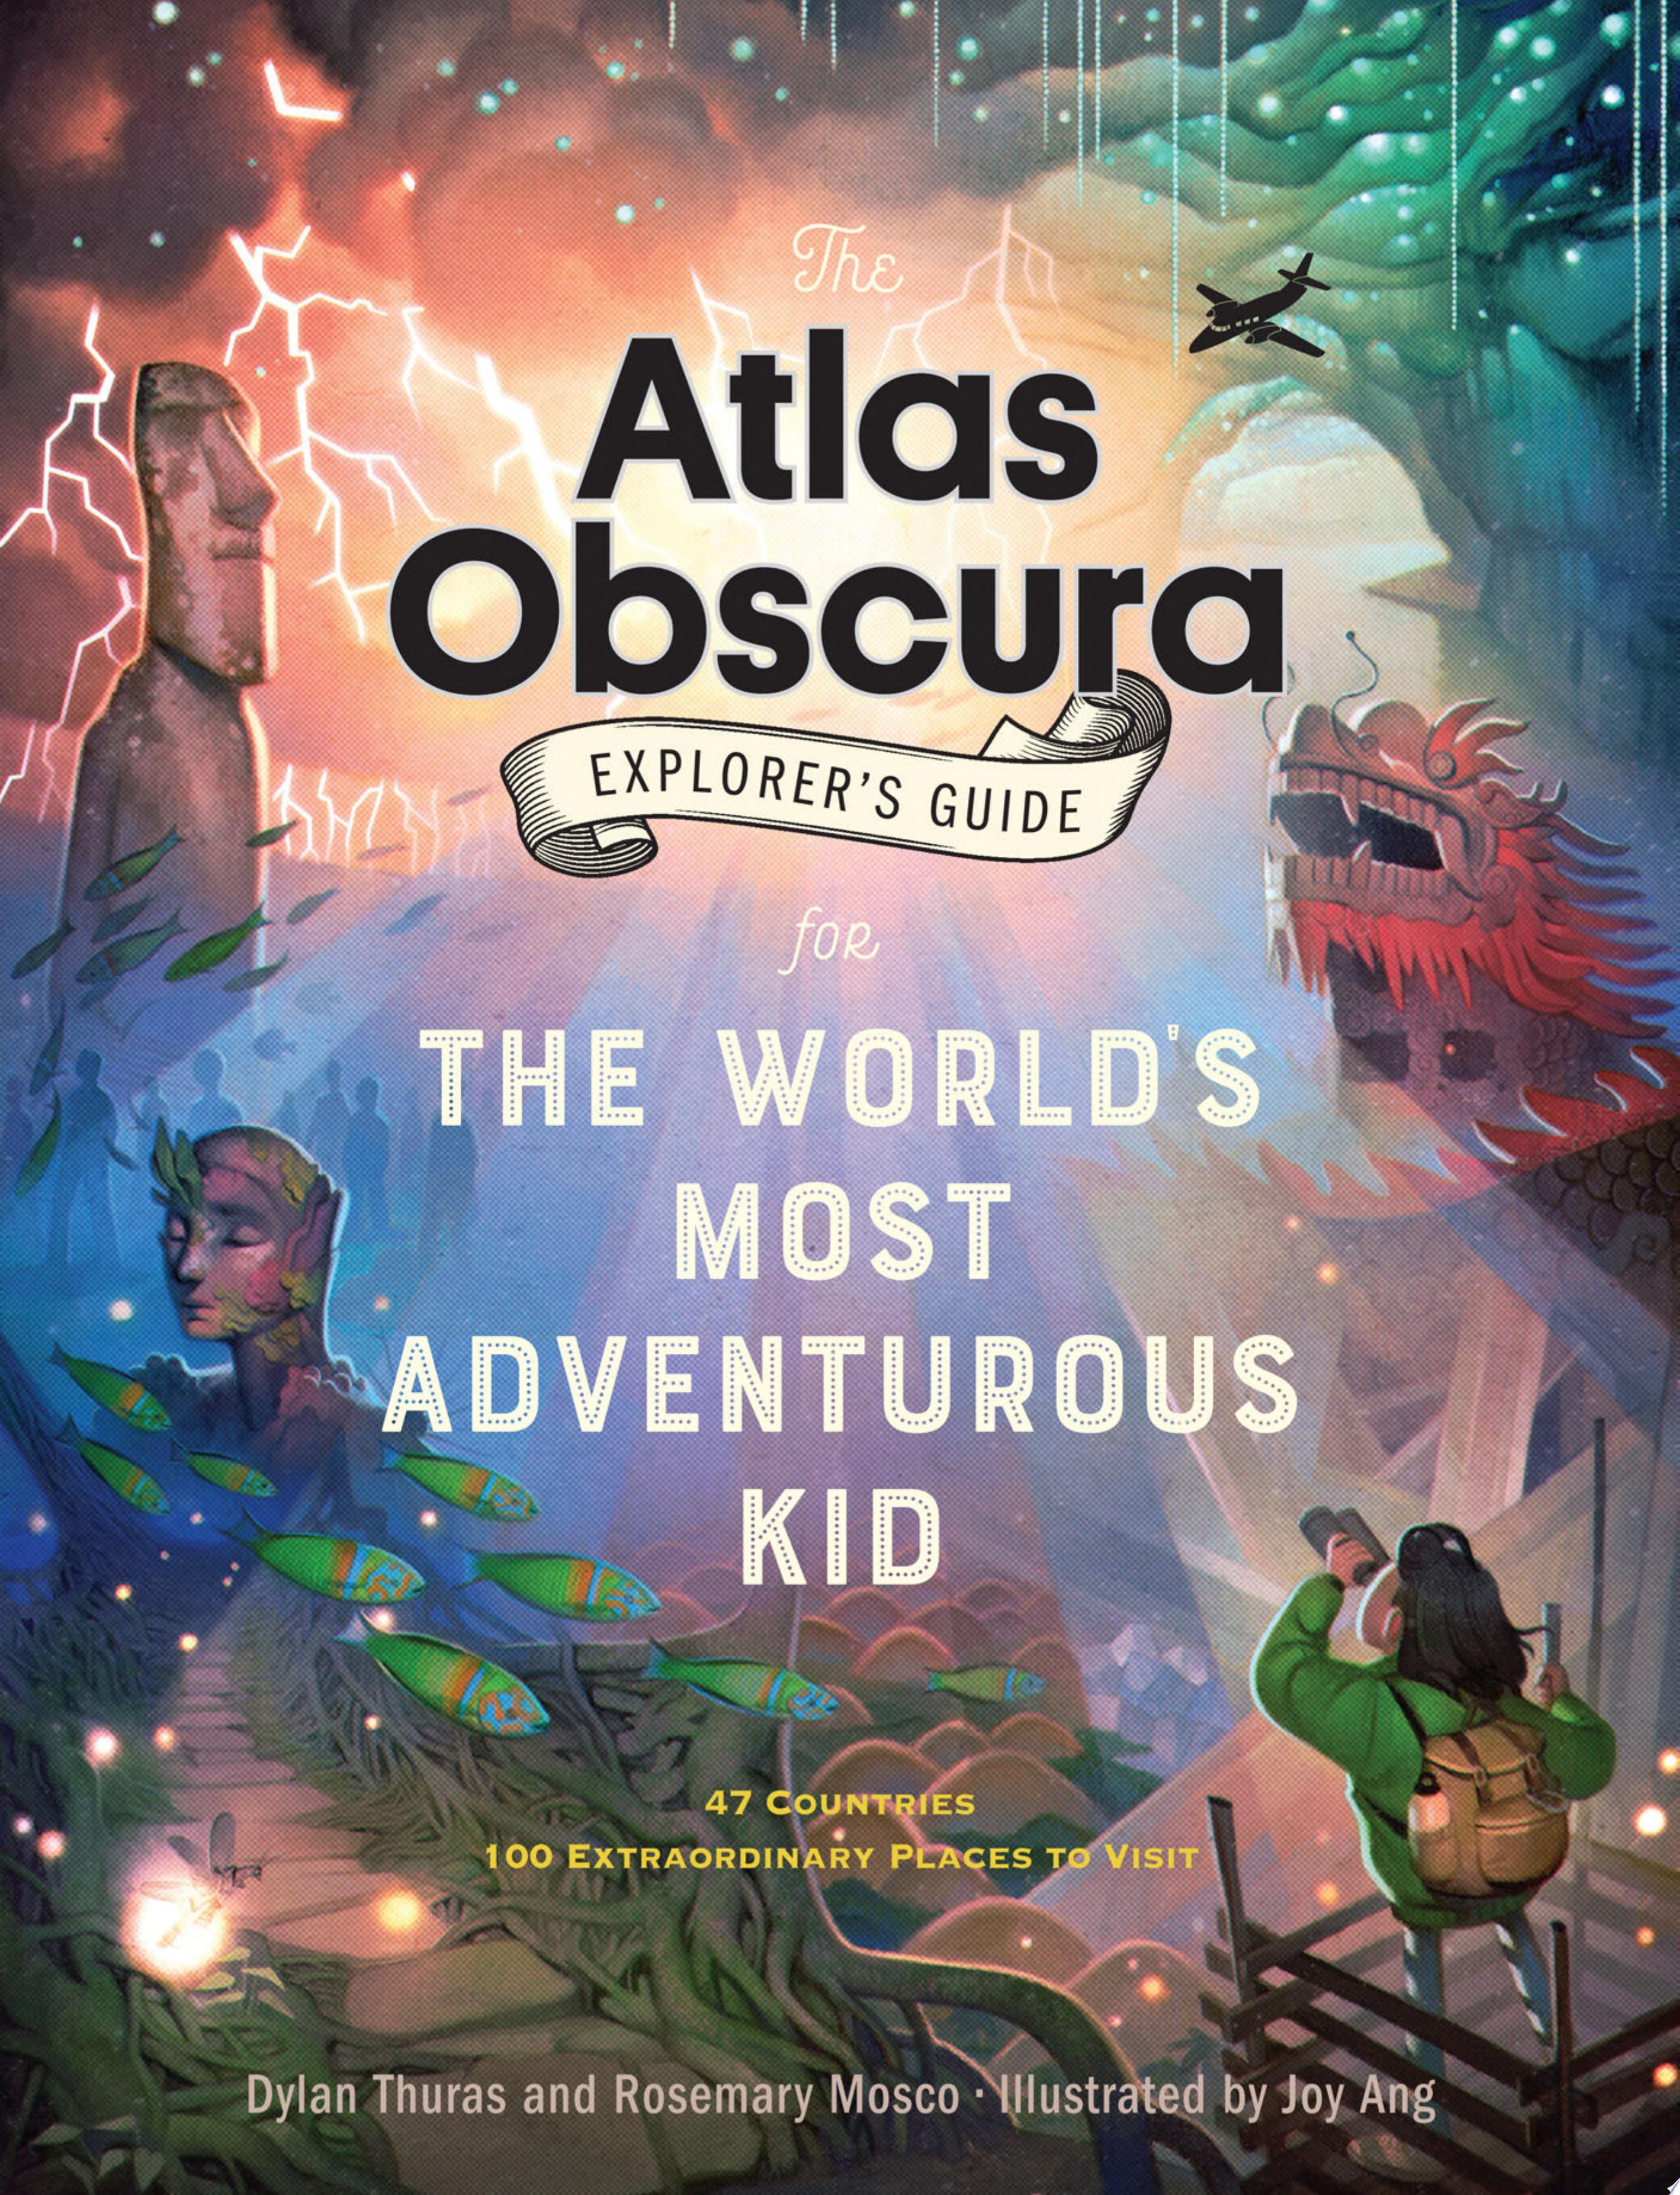 Image for "The Atlas Obscura Explorer’s Guide for the World’s Most Adventurous Kid"